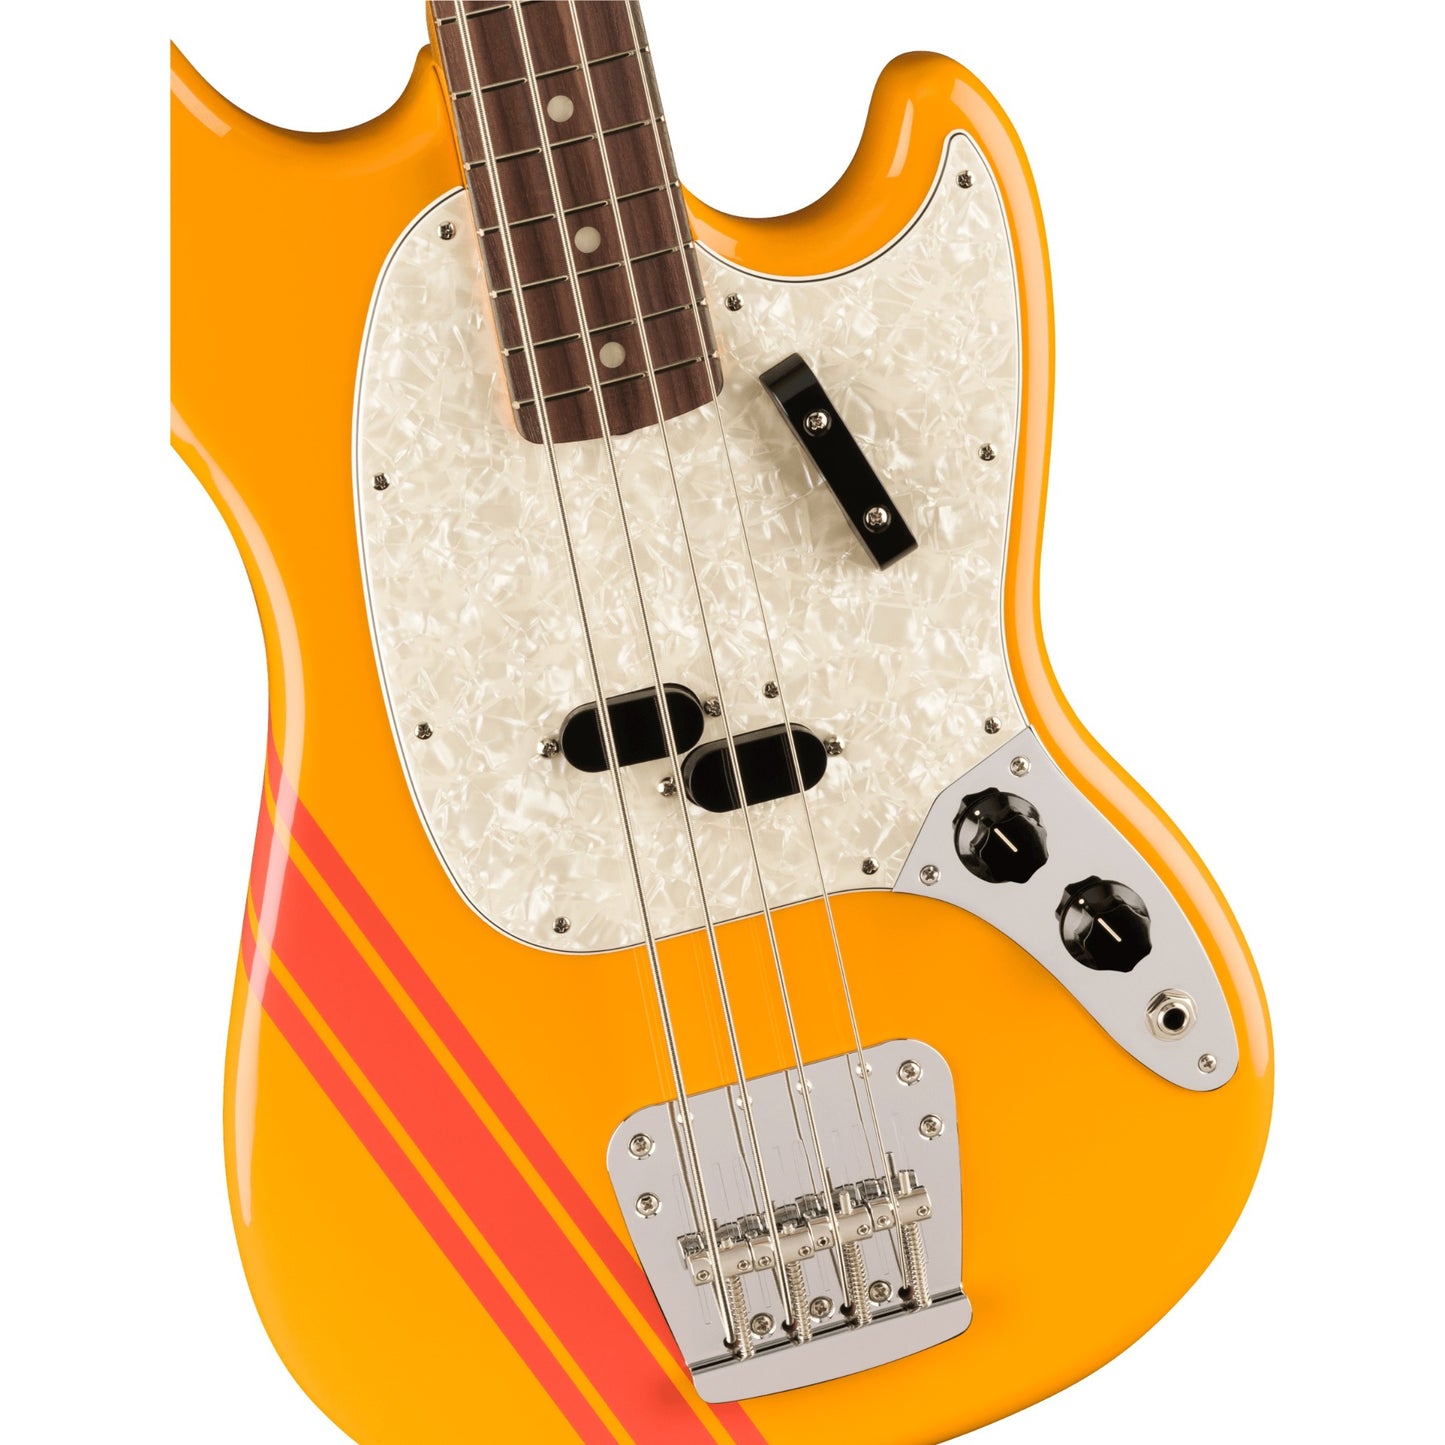 Fender Vintera II '70s Competition Mustang Bass - Competition Orange